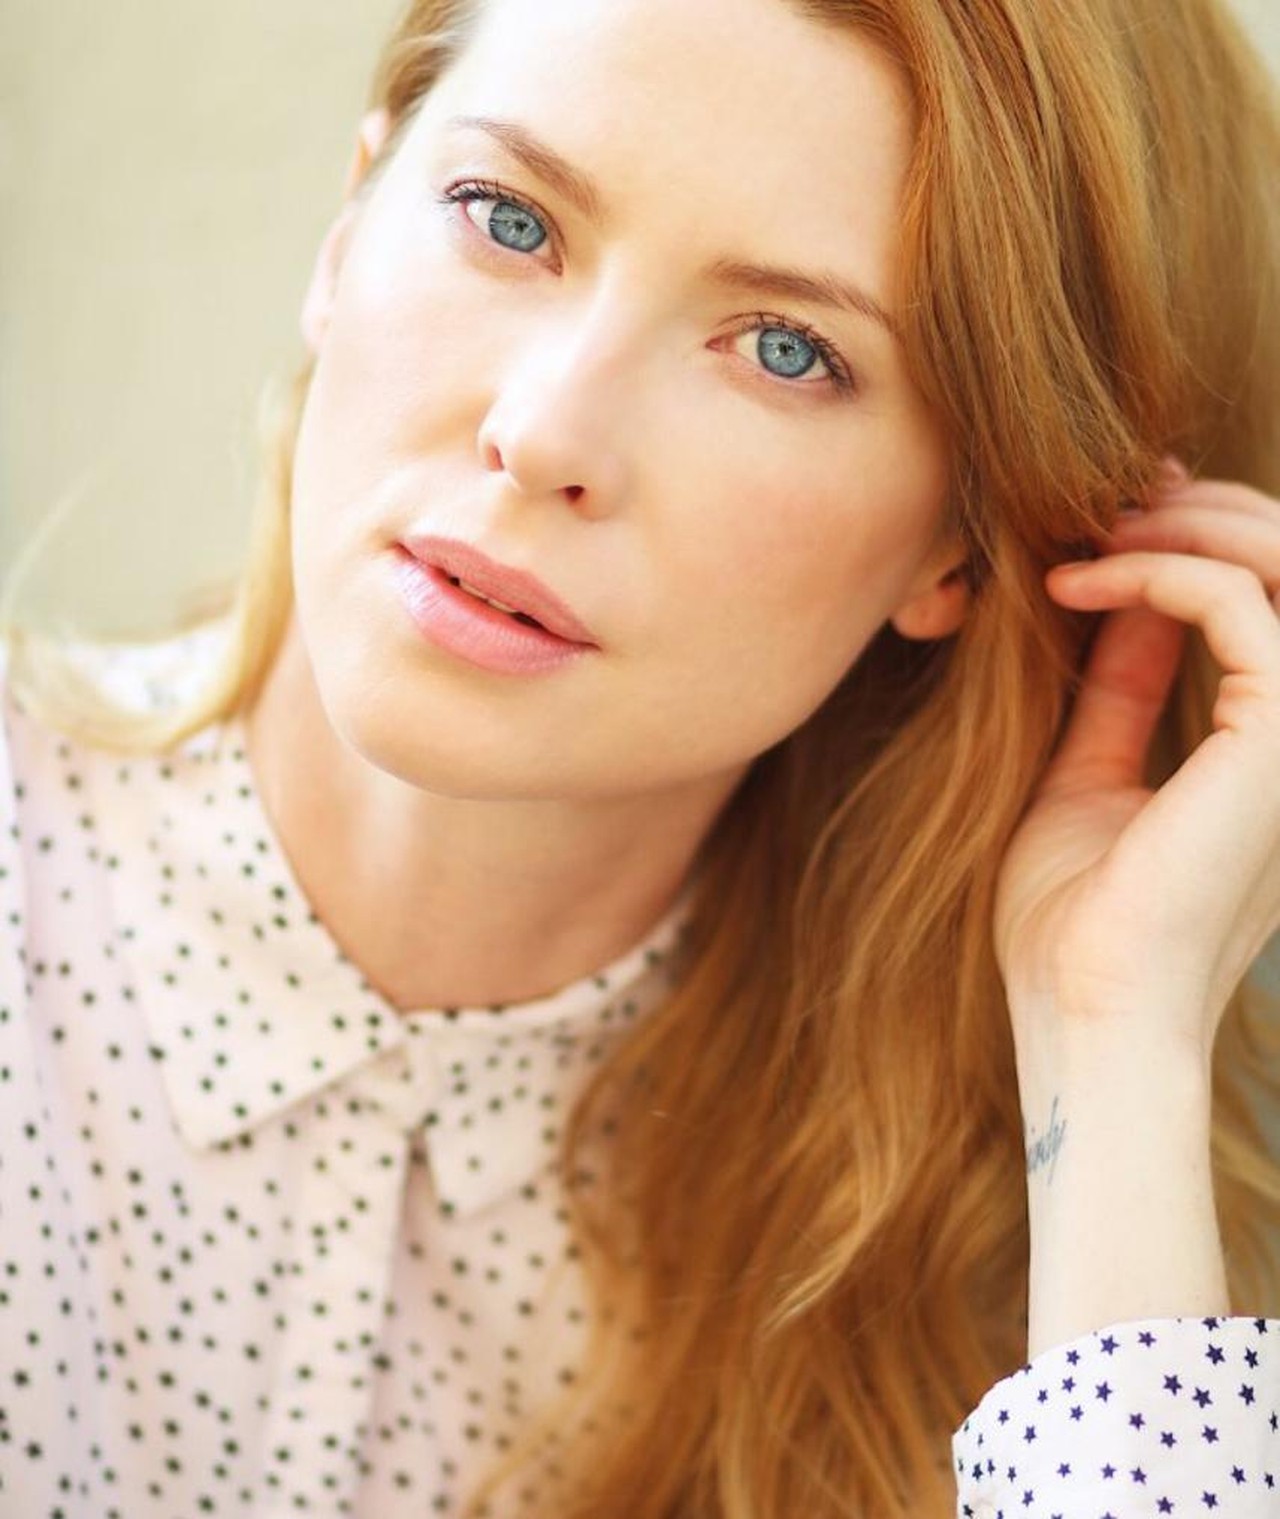 Photo of Emma Booth